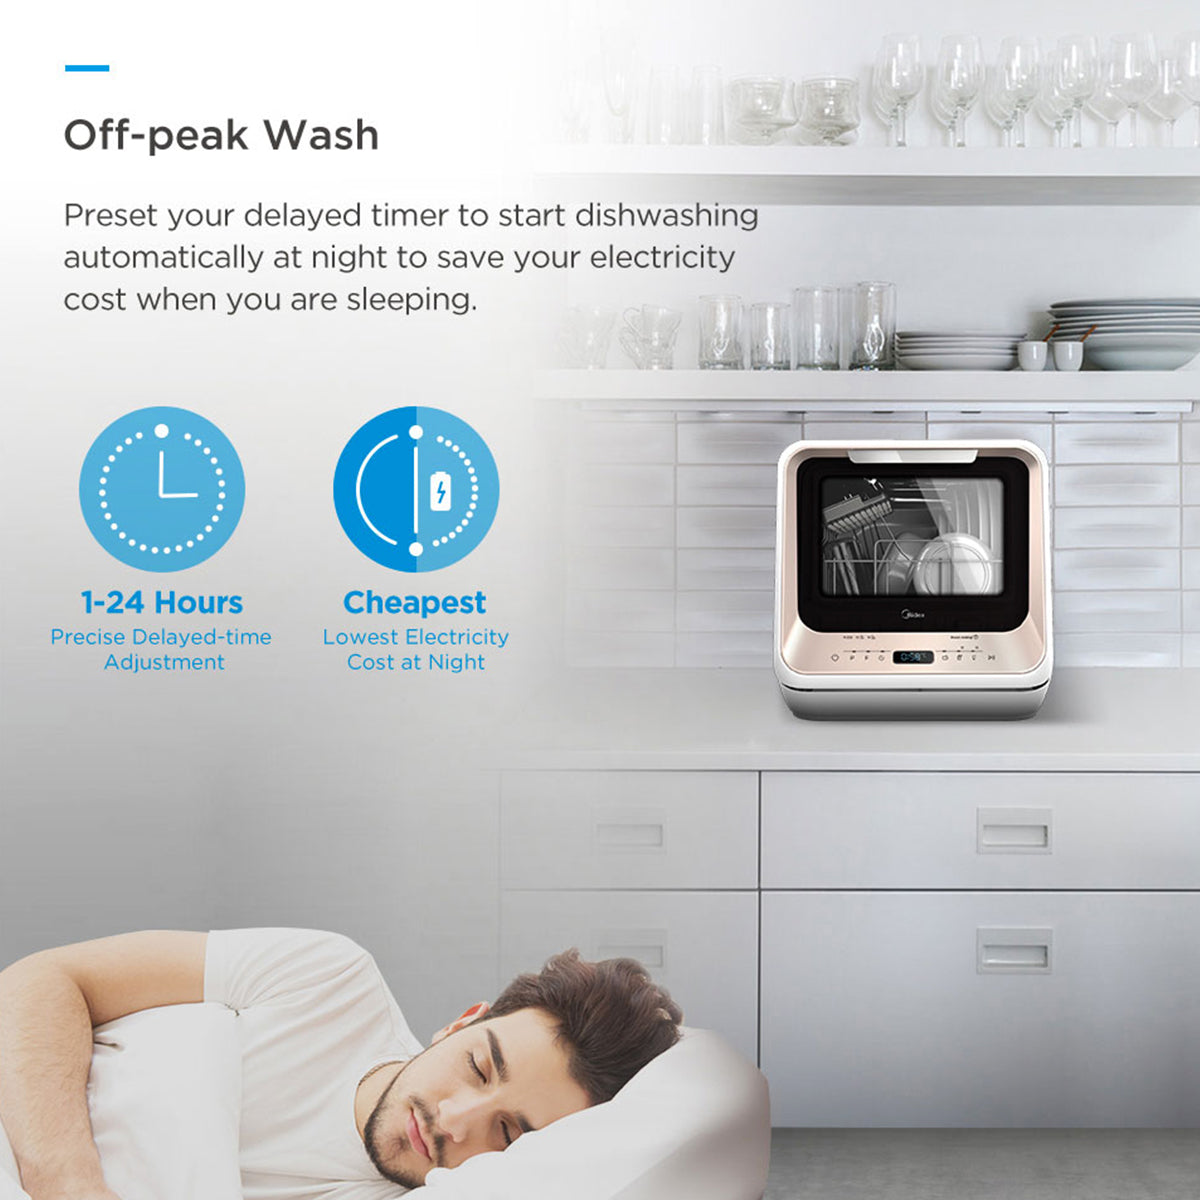 Midea 3rd Gen Benchtop Mini Dishwasher Multifunctional 3 Place Dish Washing Latest Version Water Tray Included